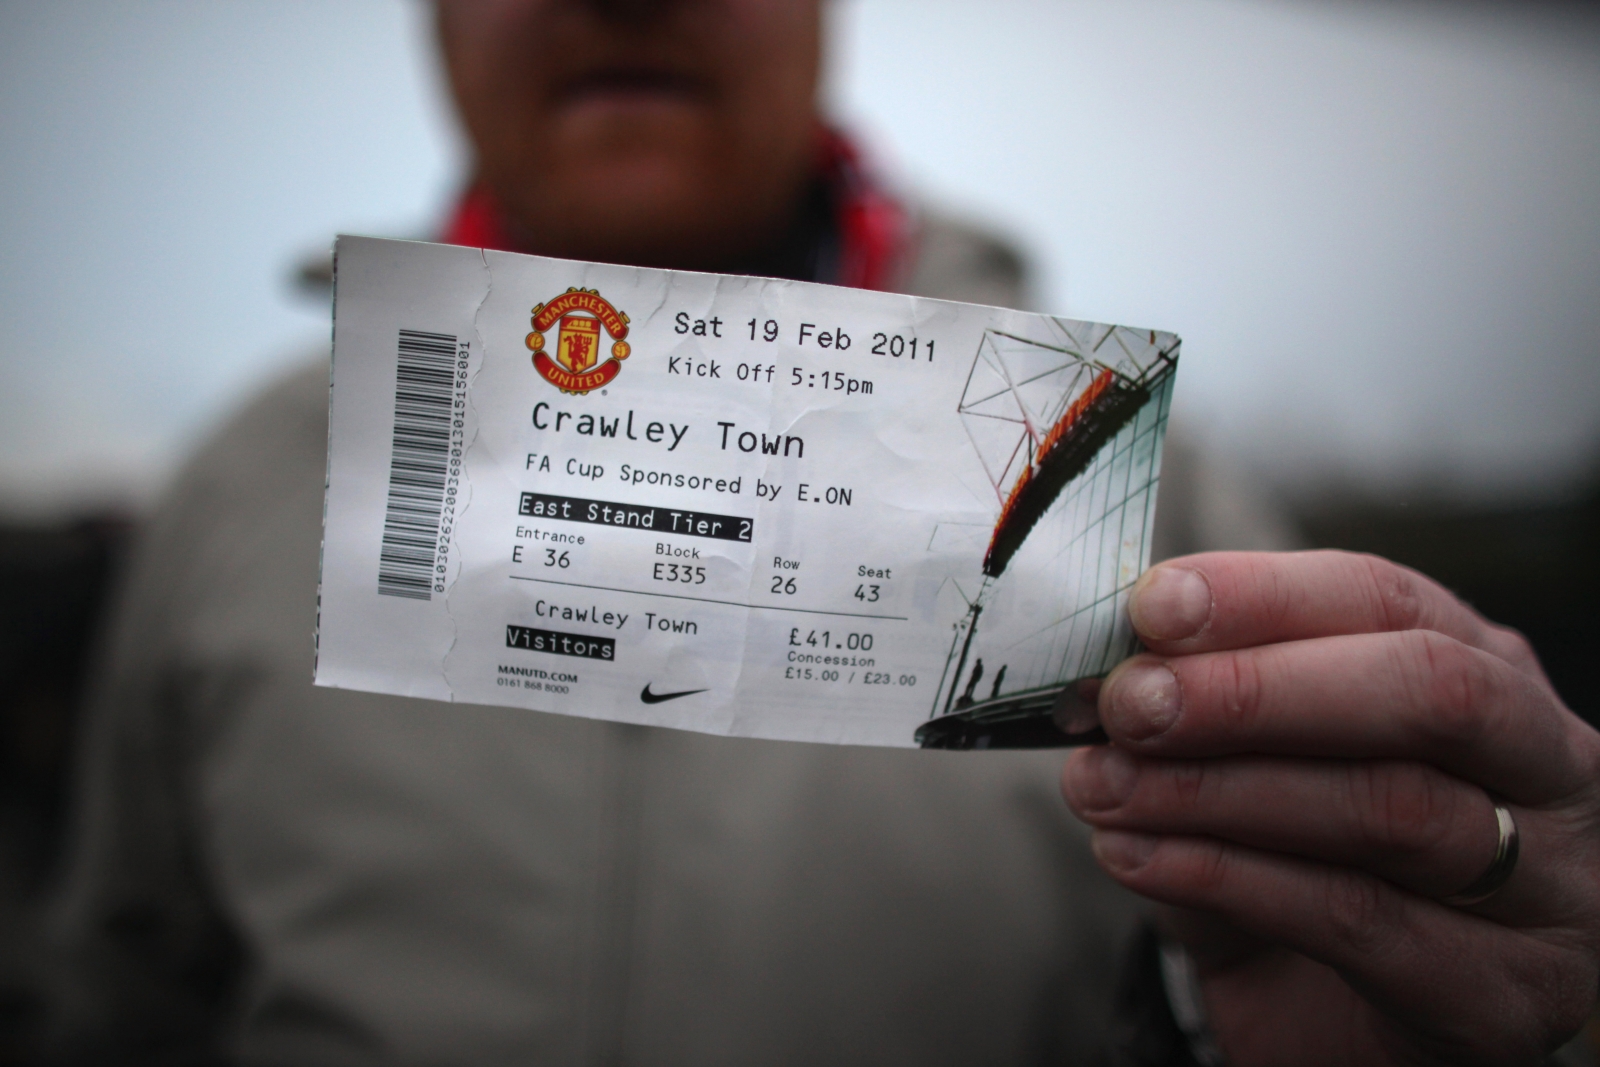 Manchester United ticket prices unlikely to be affected by £5.1bn